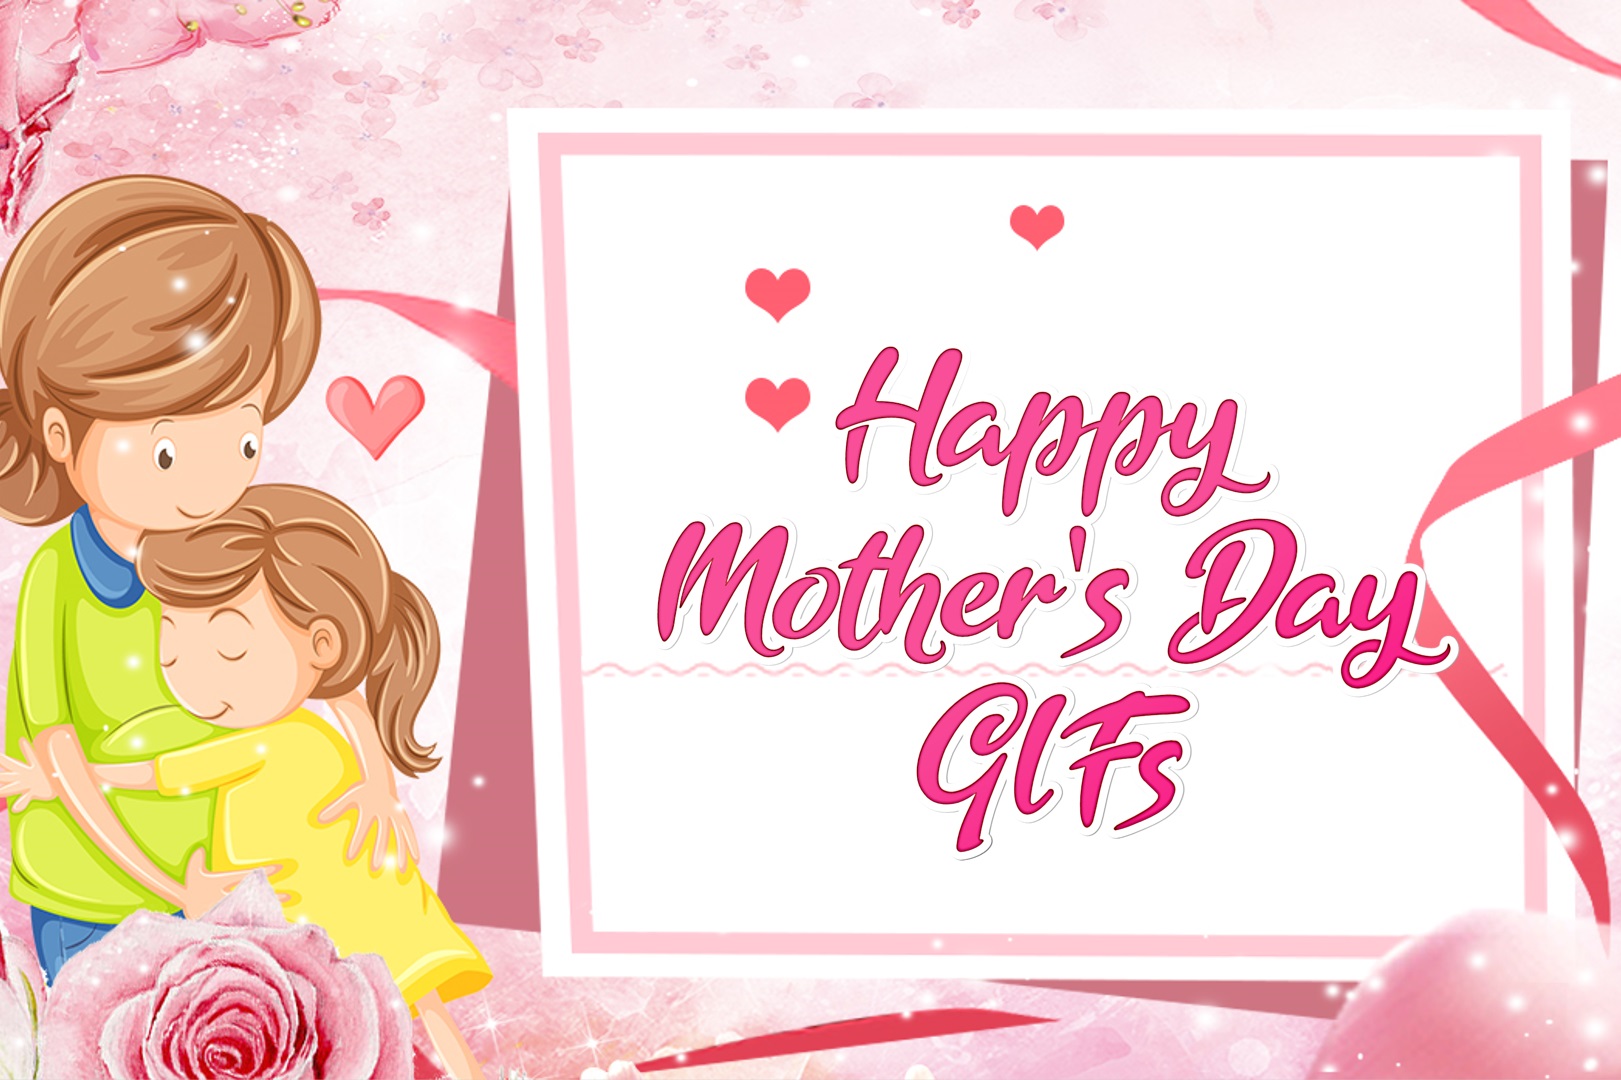 Happy Mother's Day GIFs